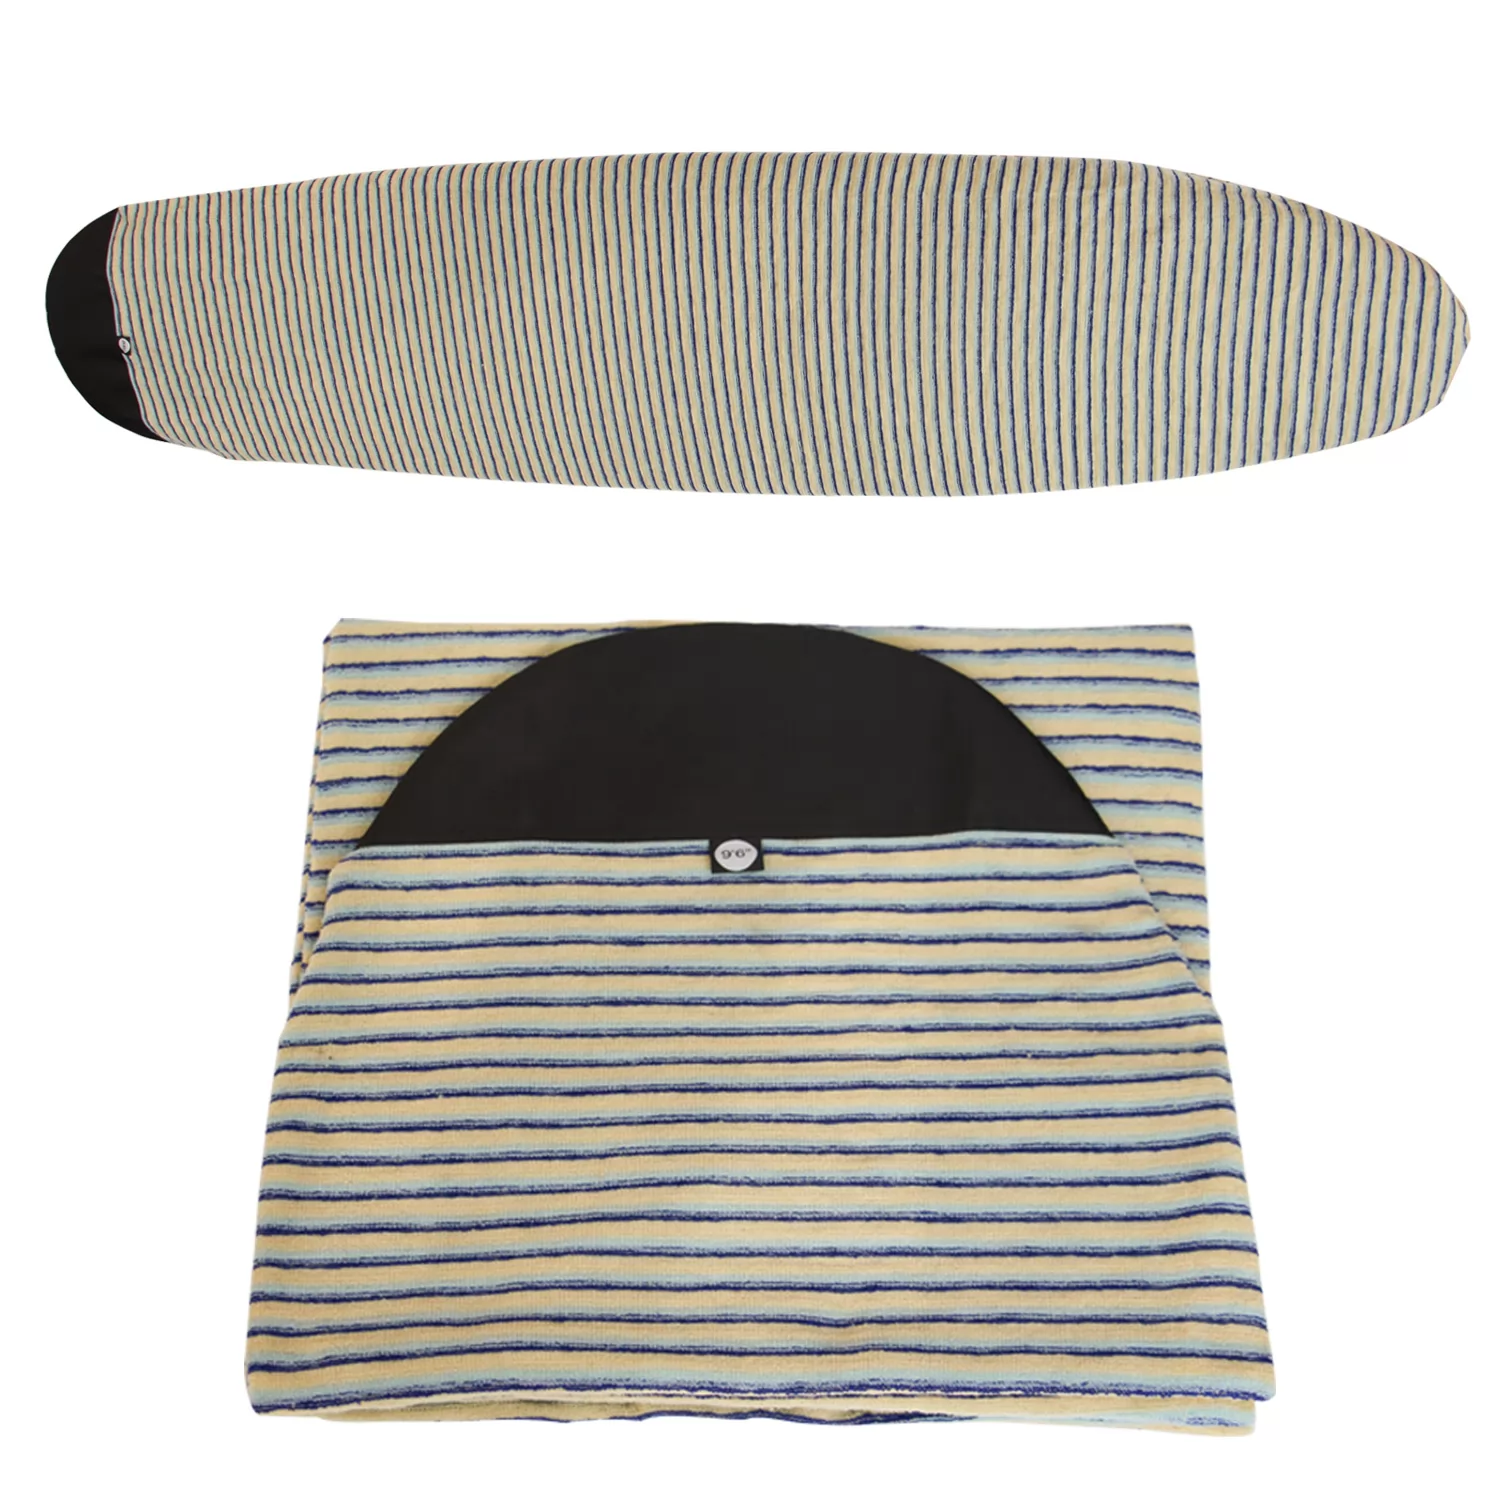 Surfboard Sock Cover - Easy Protection for Your Surfboard